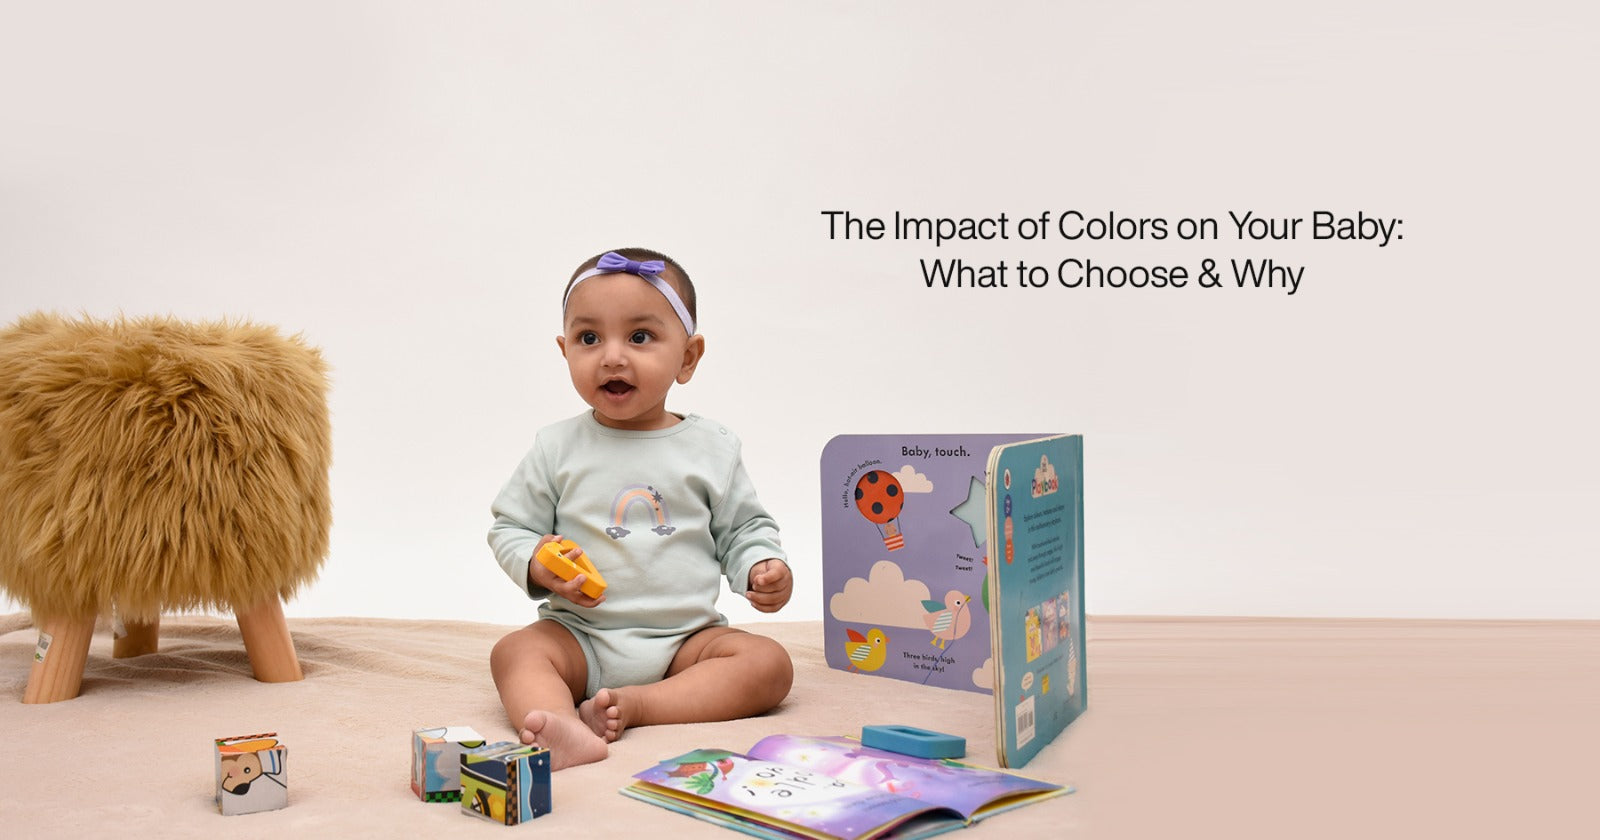 The Impact of Colors on Your Baby: What to Choose & Why